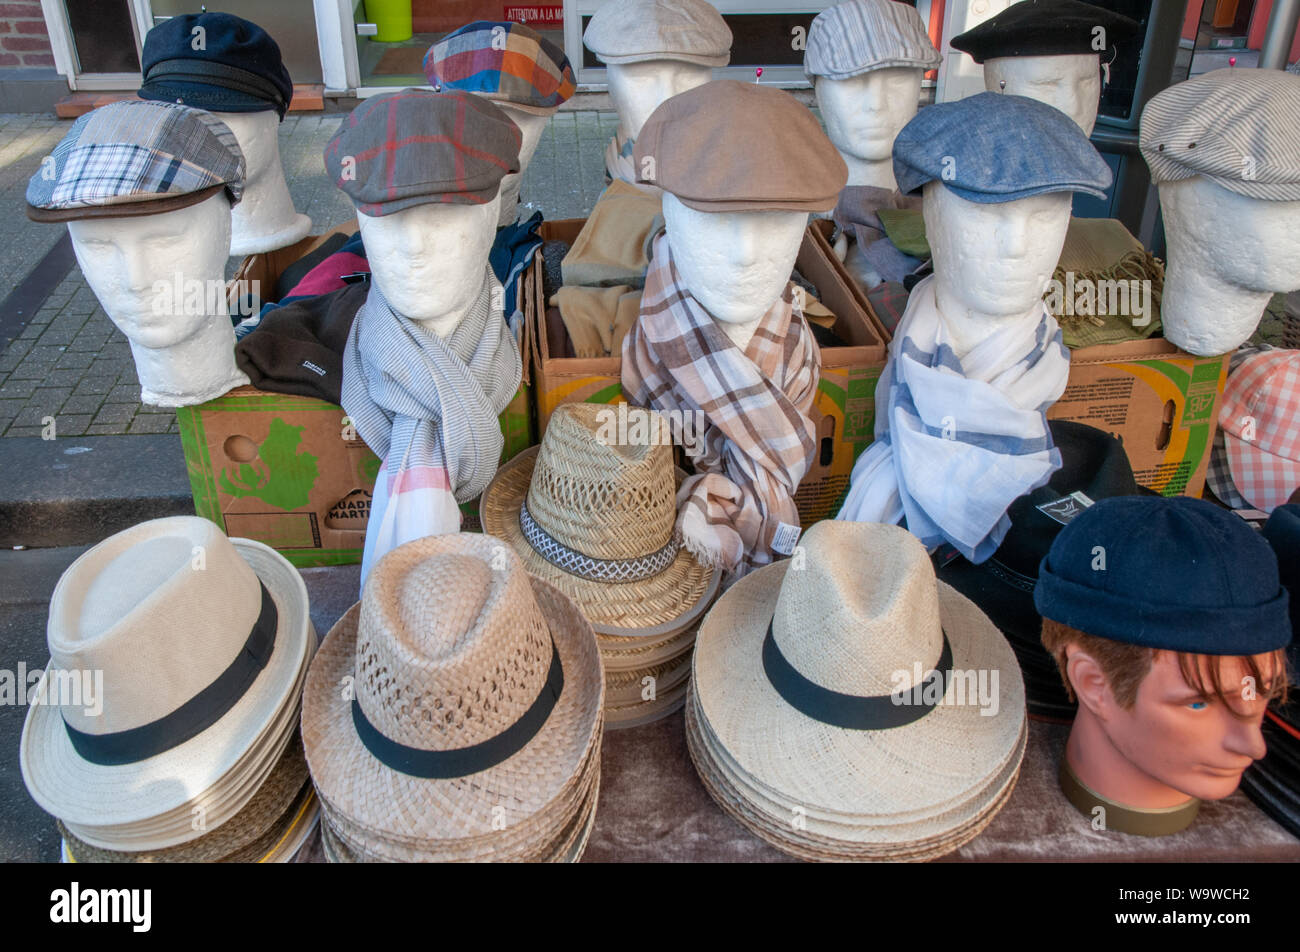 A display of hats and caps at a market stall in open air market in centre of Dieppe, France Stock Photo